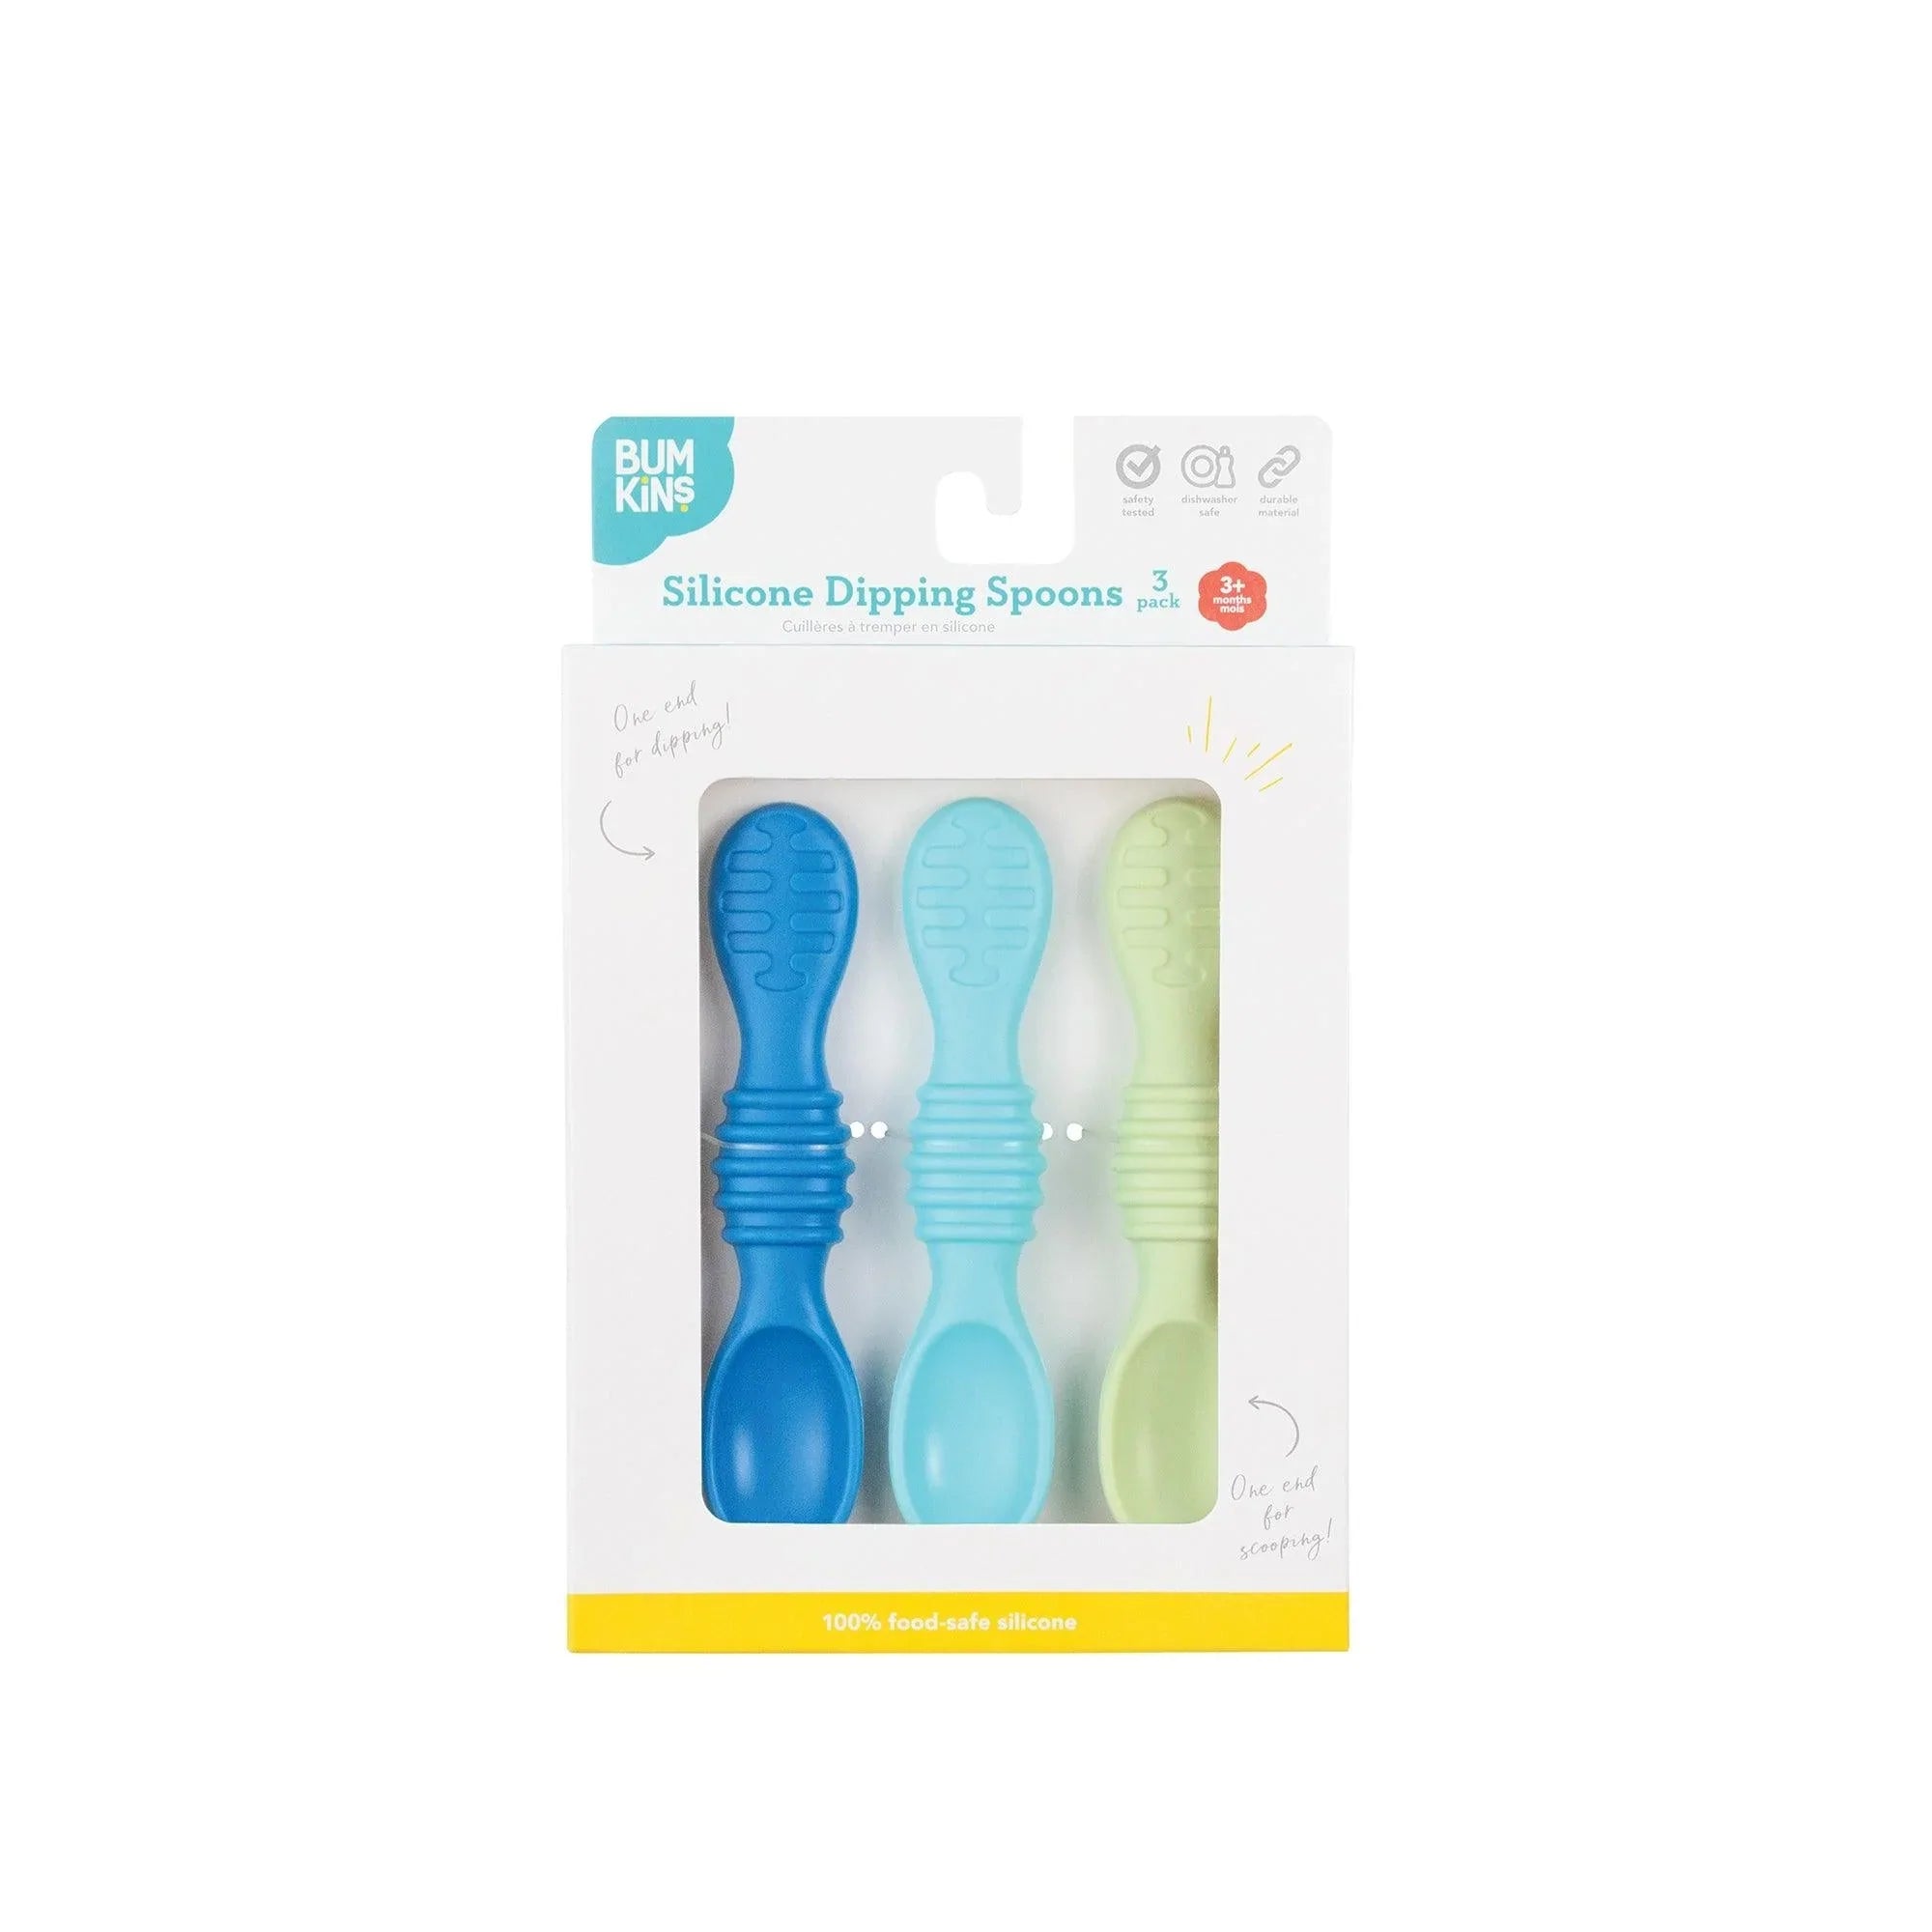 Baby Spoons Silicone | Gentle on Gums